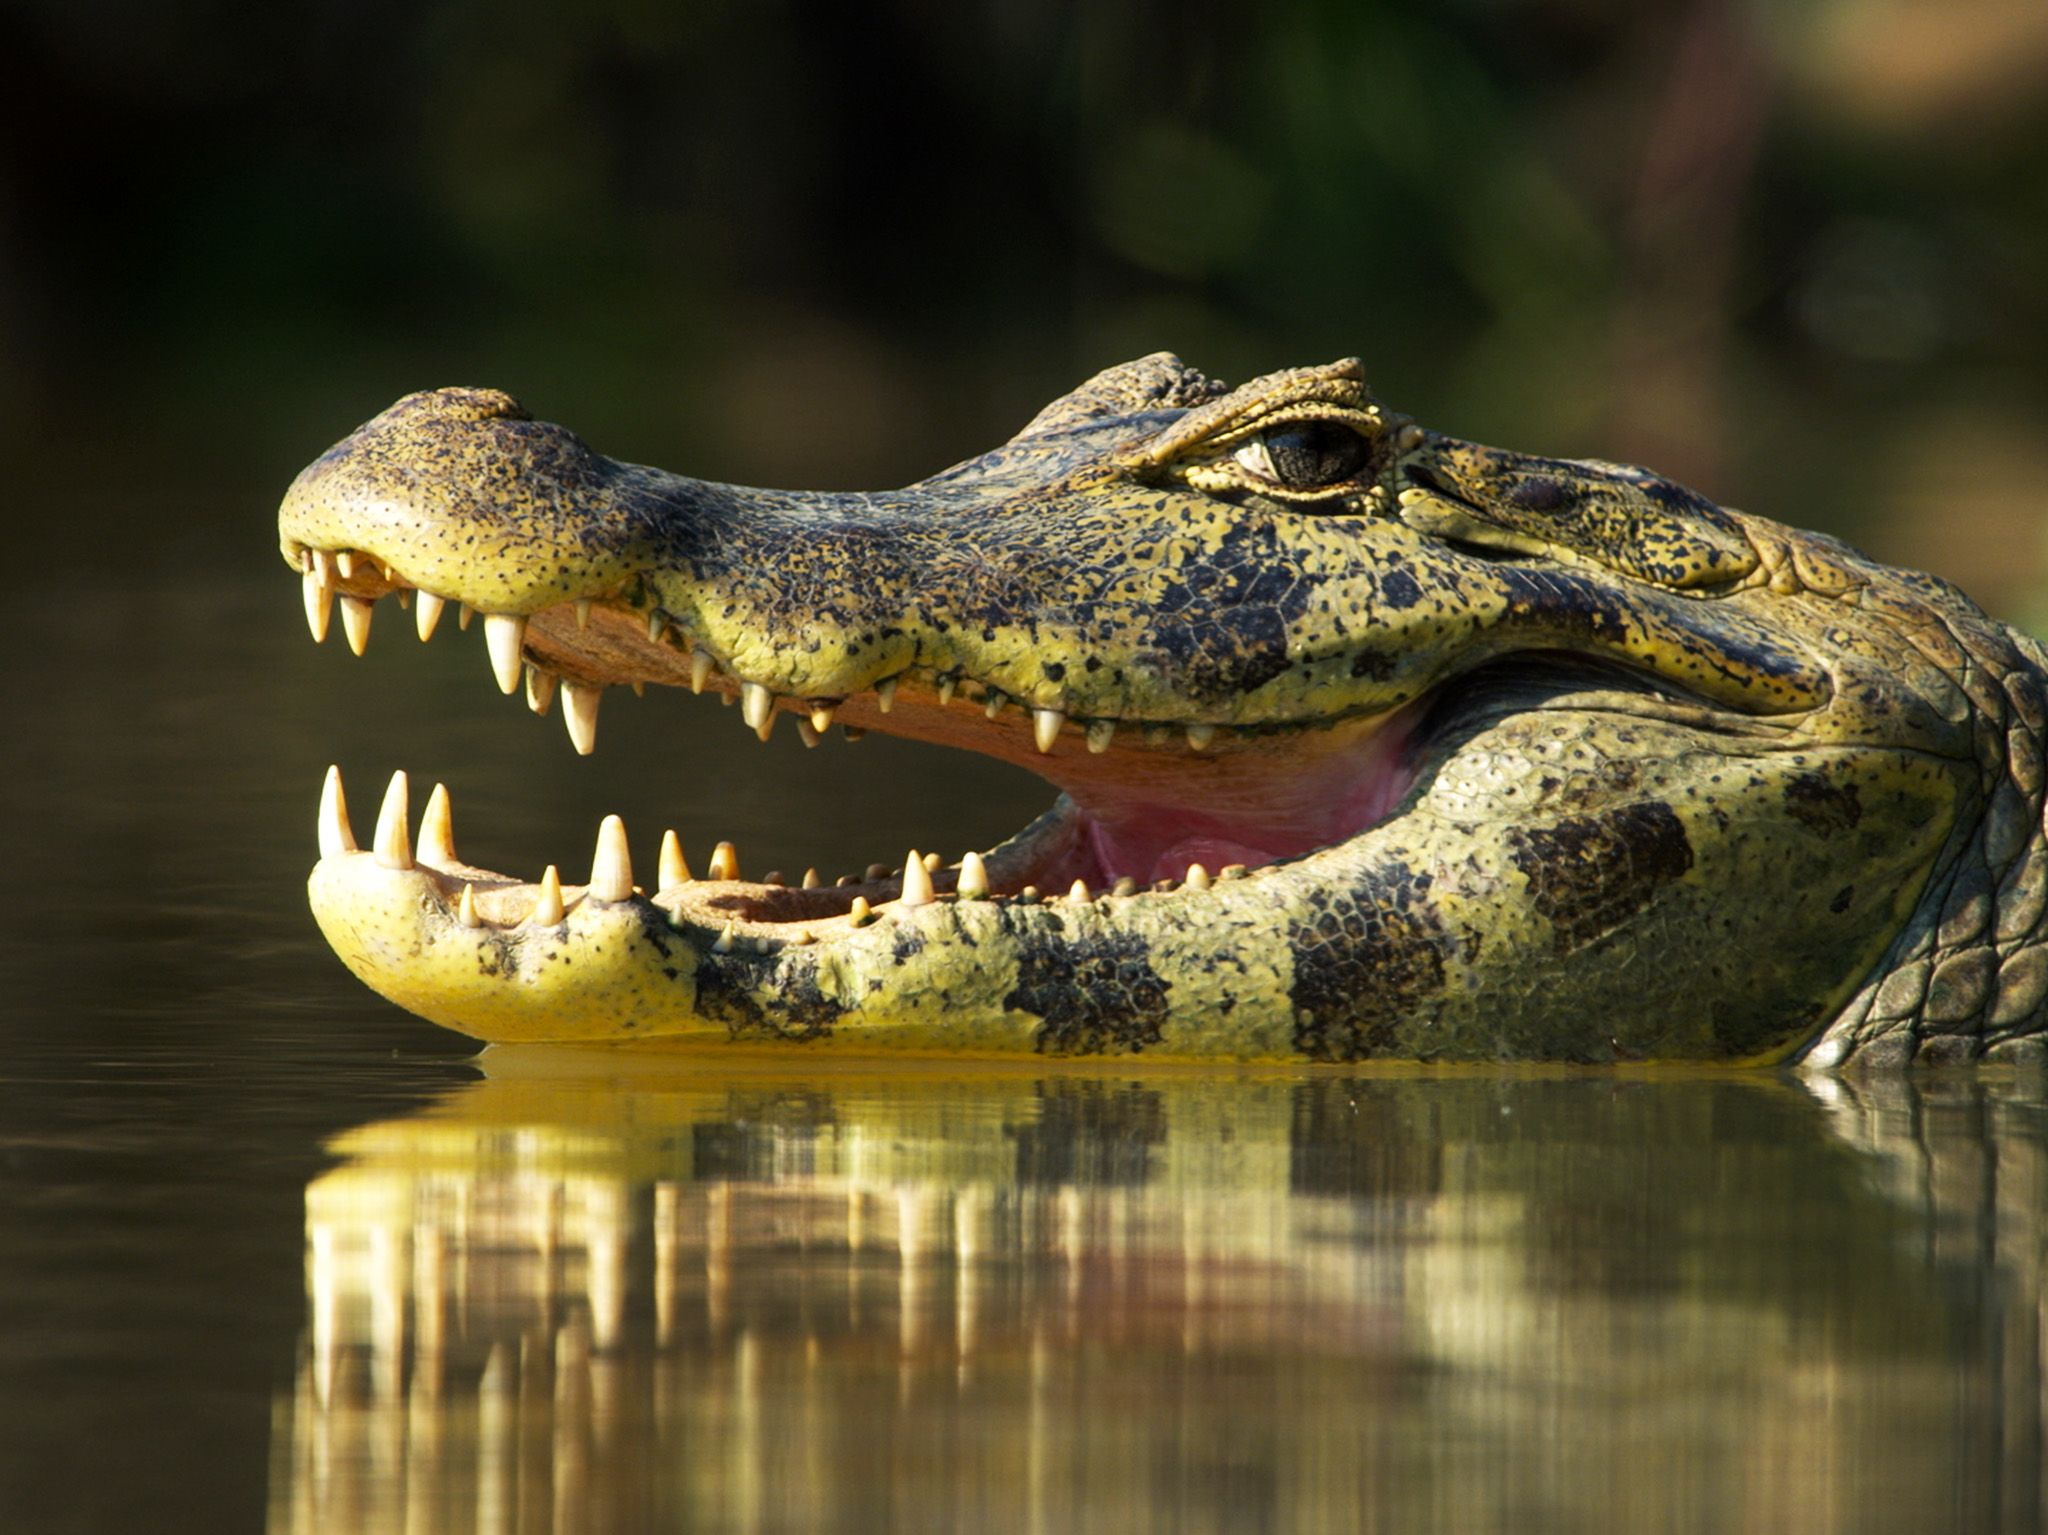 Pantanal, Brazil:  CU of Caiman in the water. This image is from Jaguar vs. Croc. [Photo of the day - January 2018]